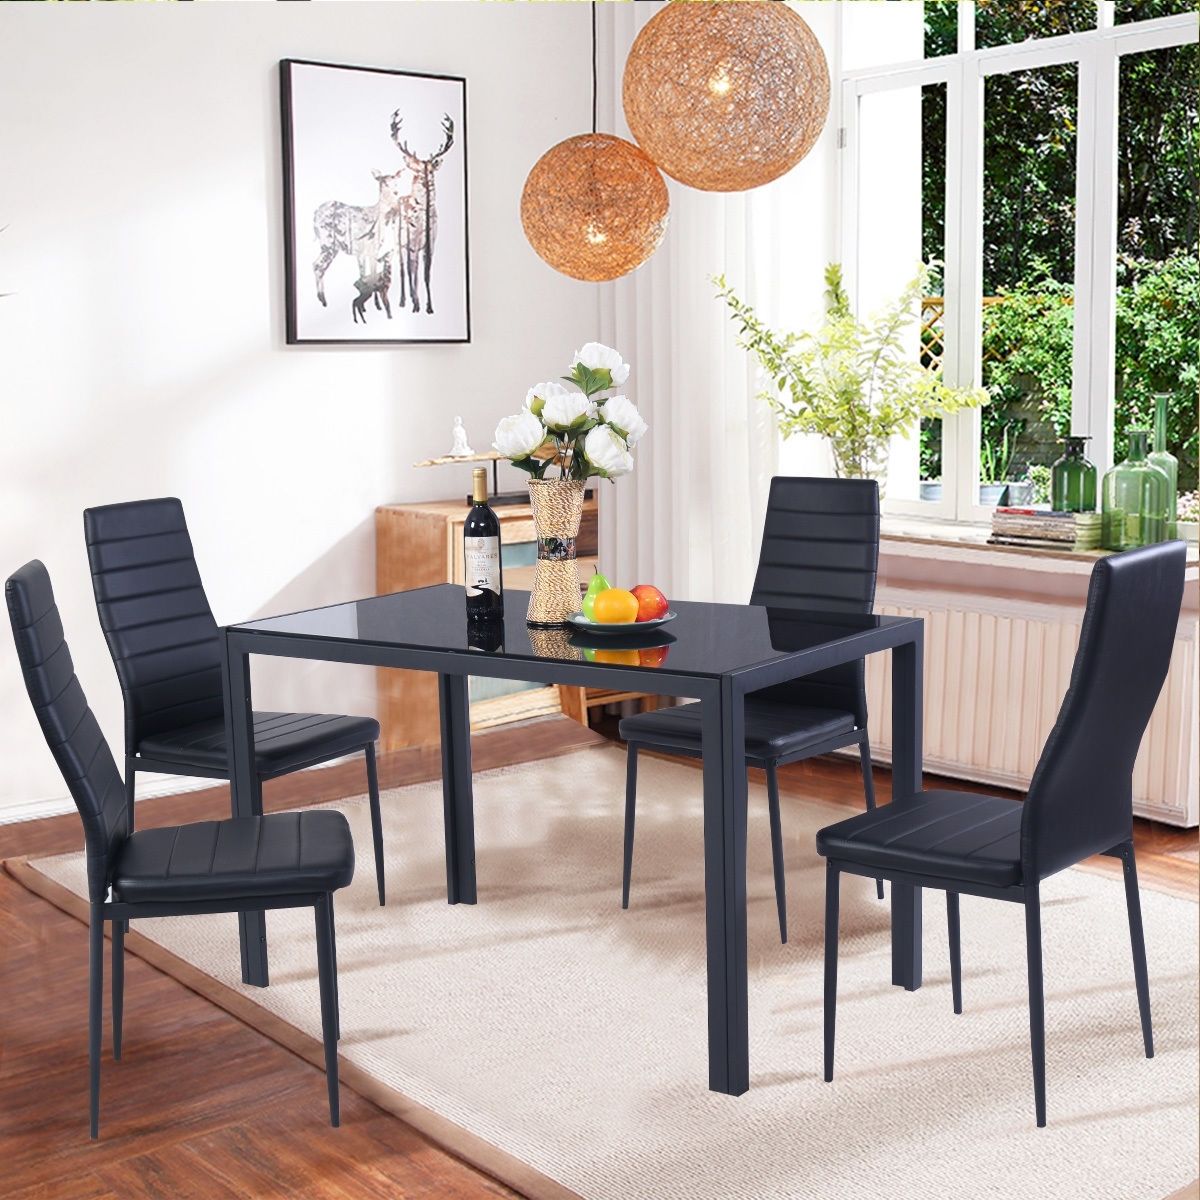 Breakfast Tables For Most Recent Craftsman 5 Piece Round Dining Sets With Side Chairs (View 20 of 20)